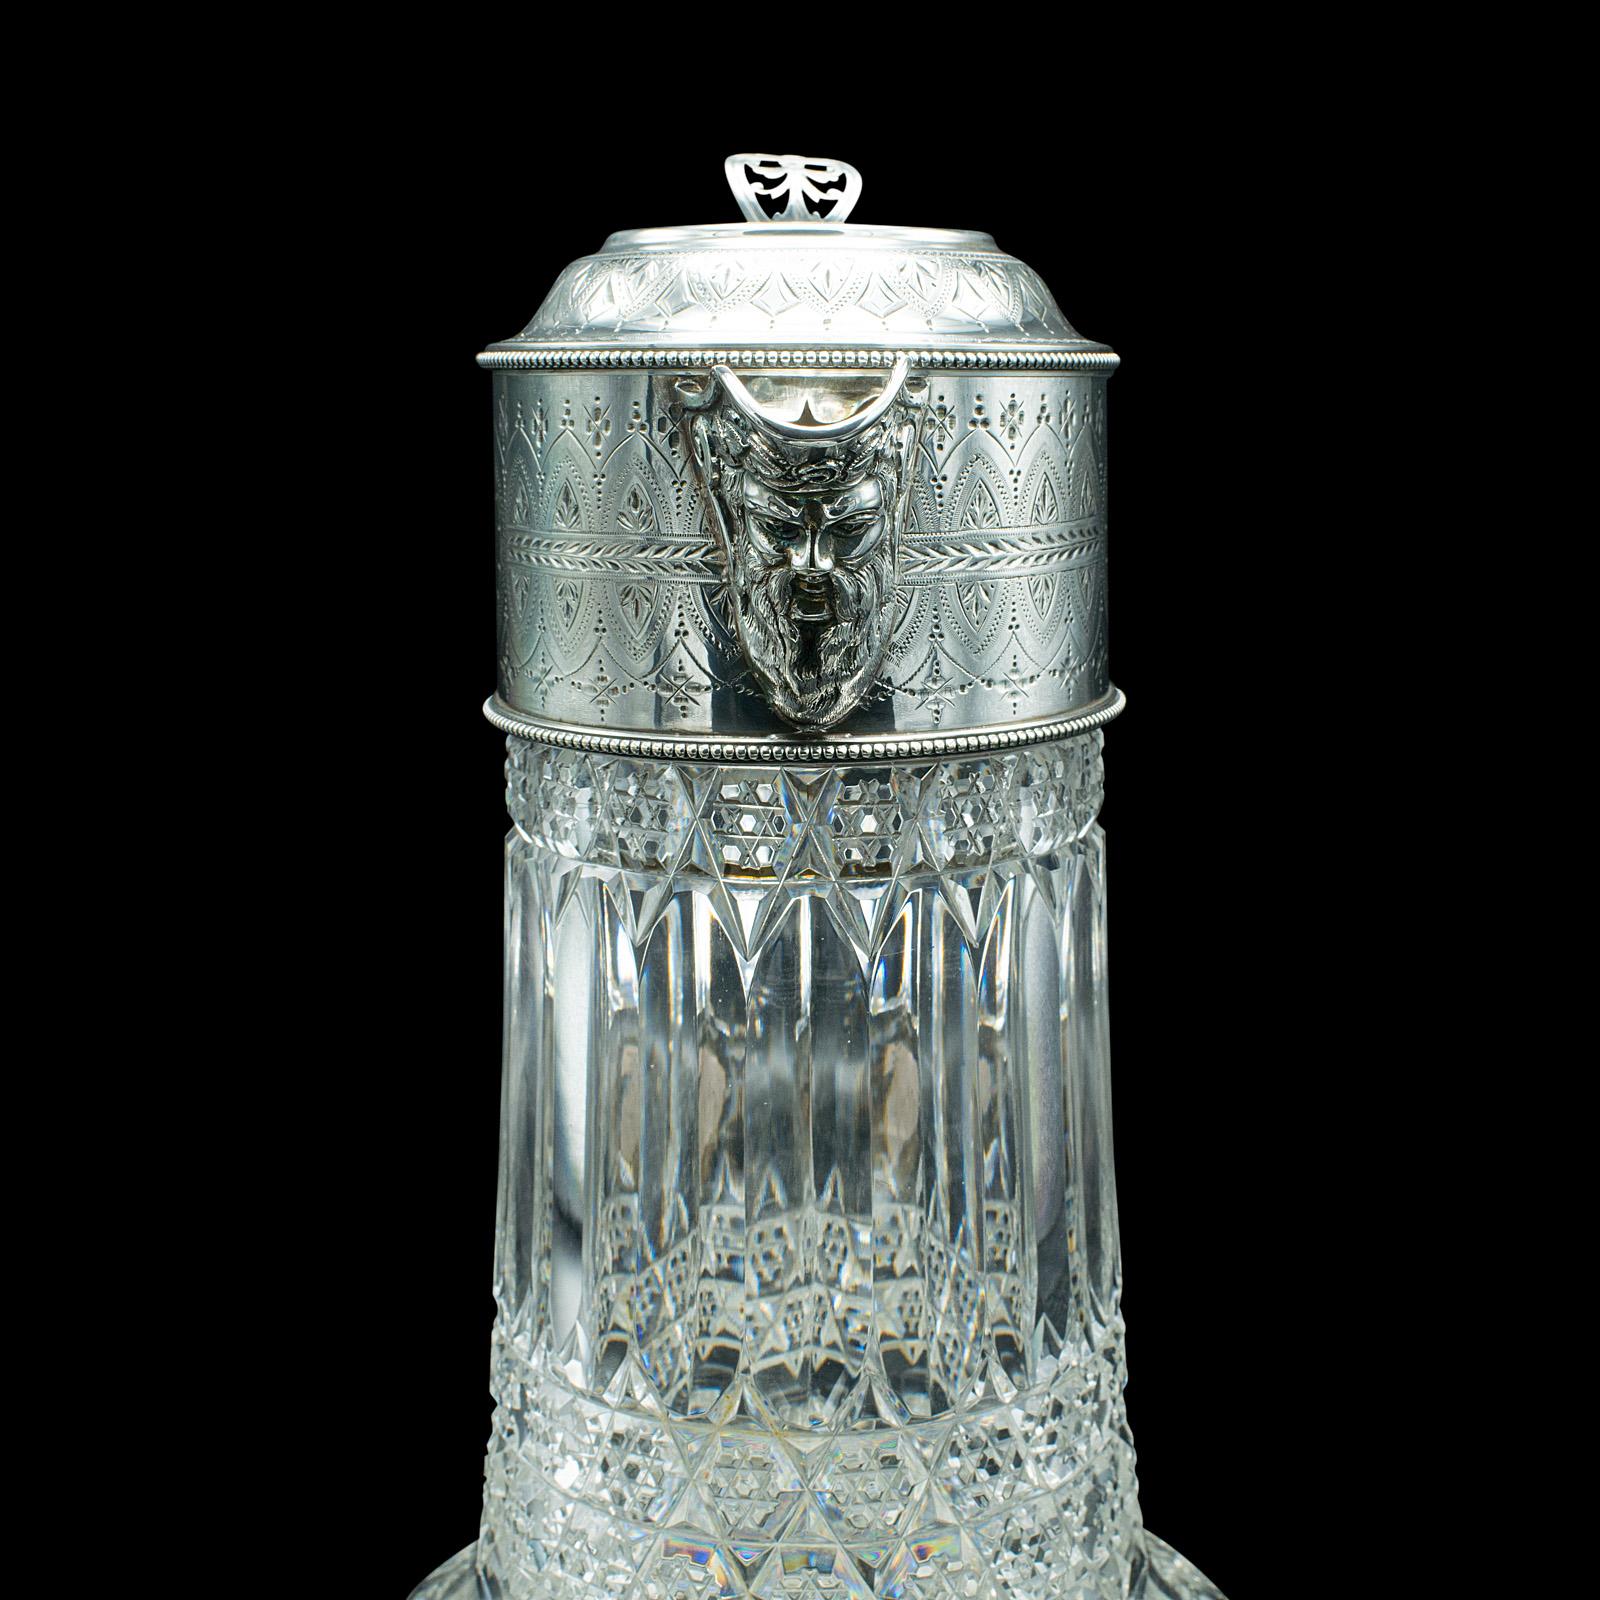 Antique Claret Jug, English, Cut Glass, Silver Plate, Decanter, Victorian, 1900 For Sale 5